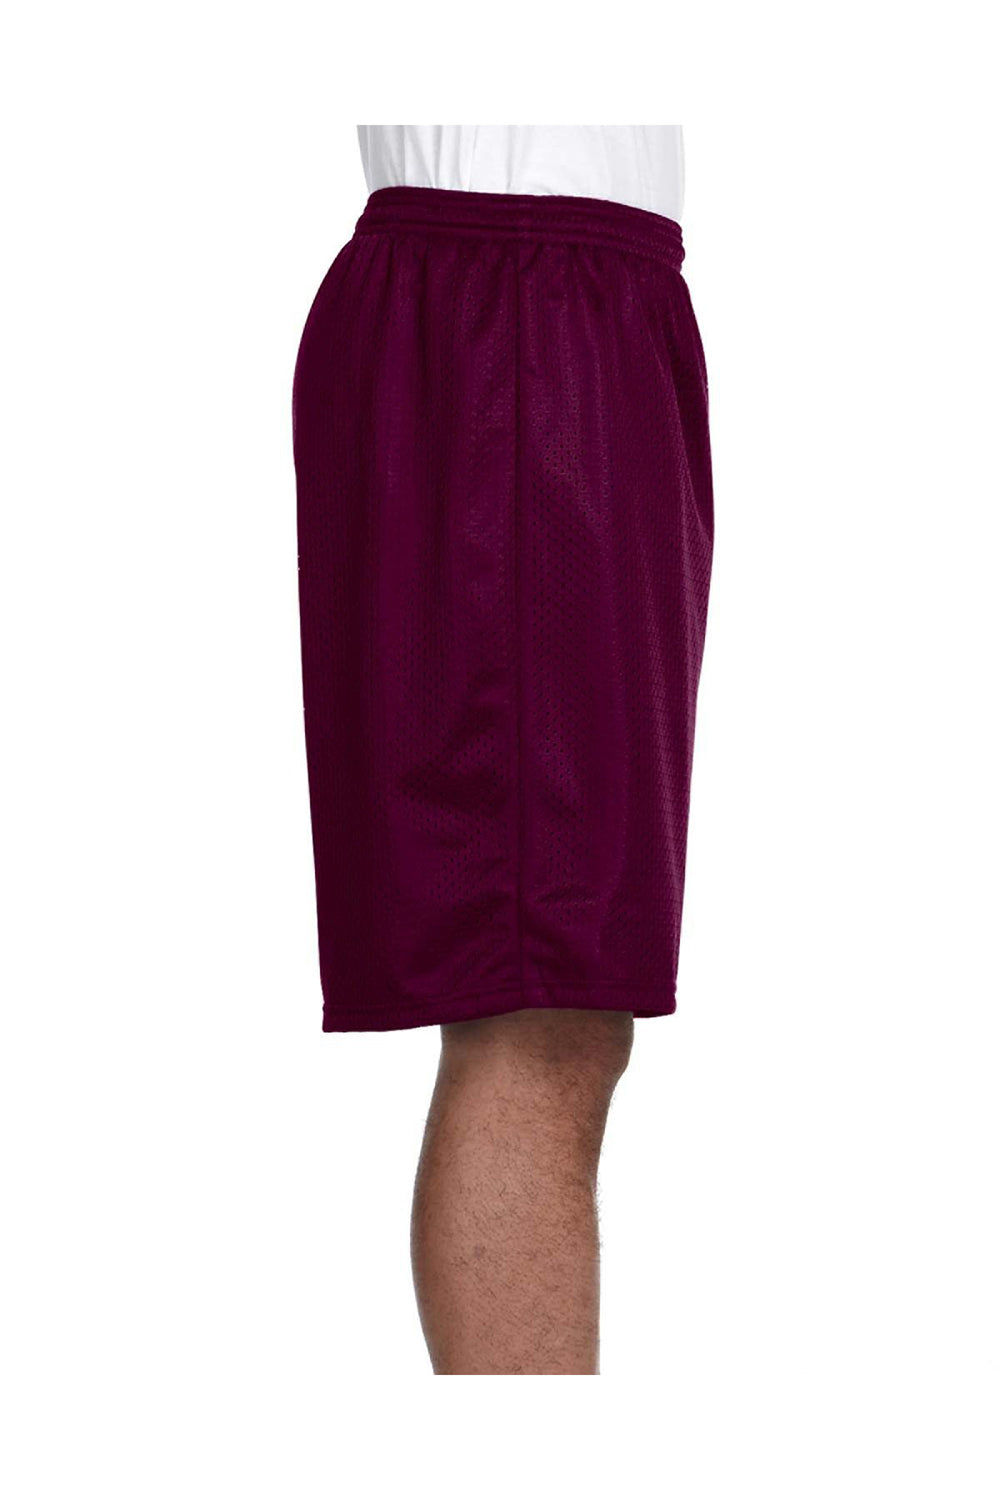 A4 N5296 Mens Moisture Wicking Tricot Mesh Shorts Maroon Model Side